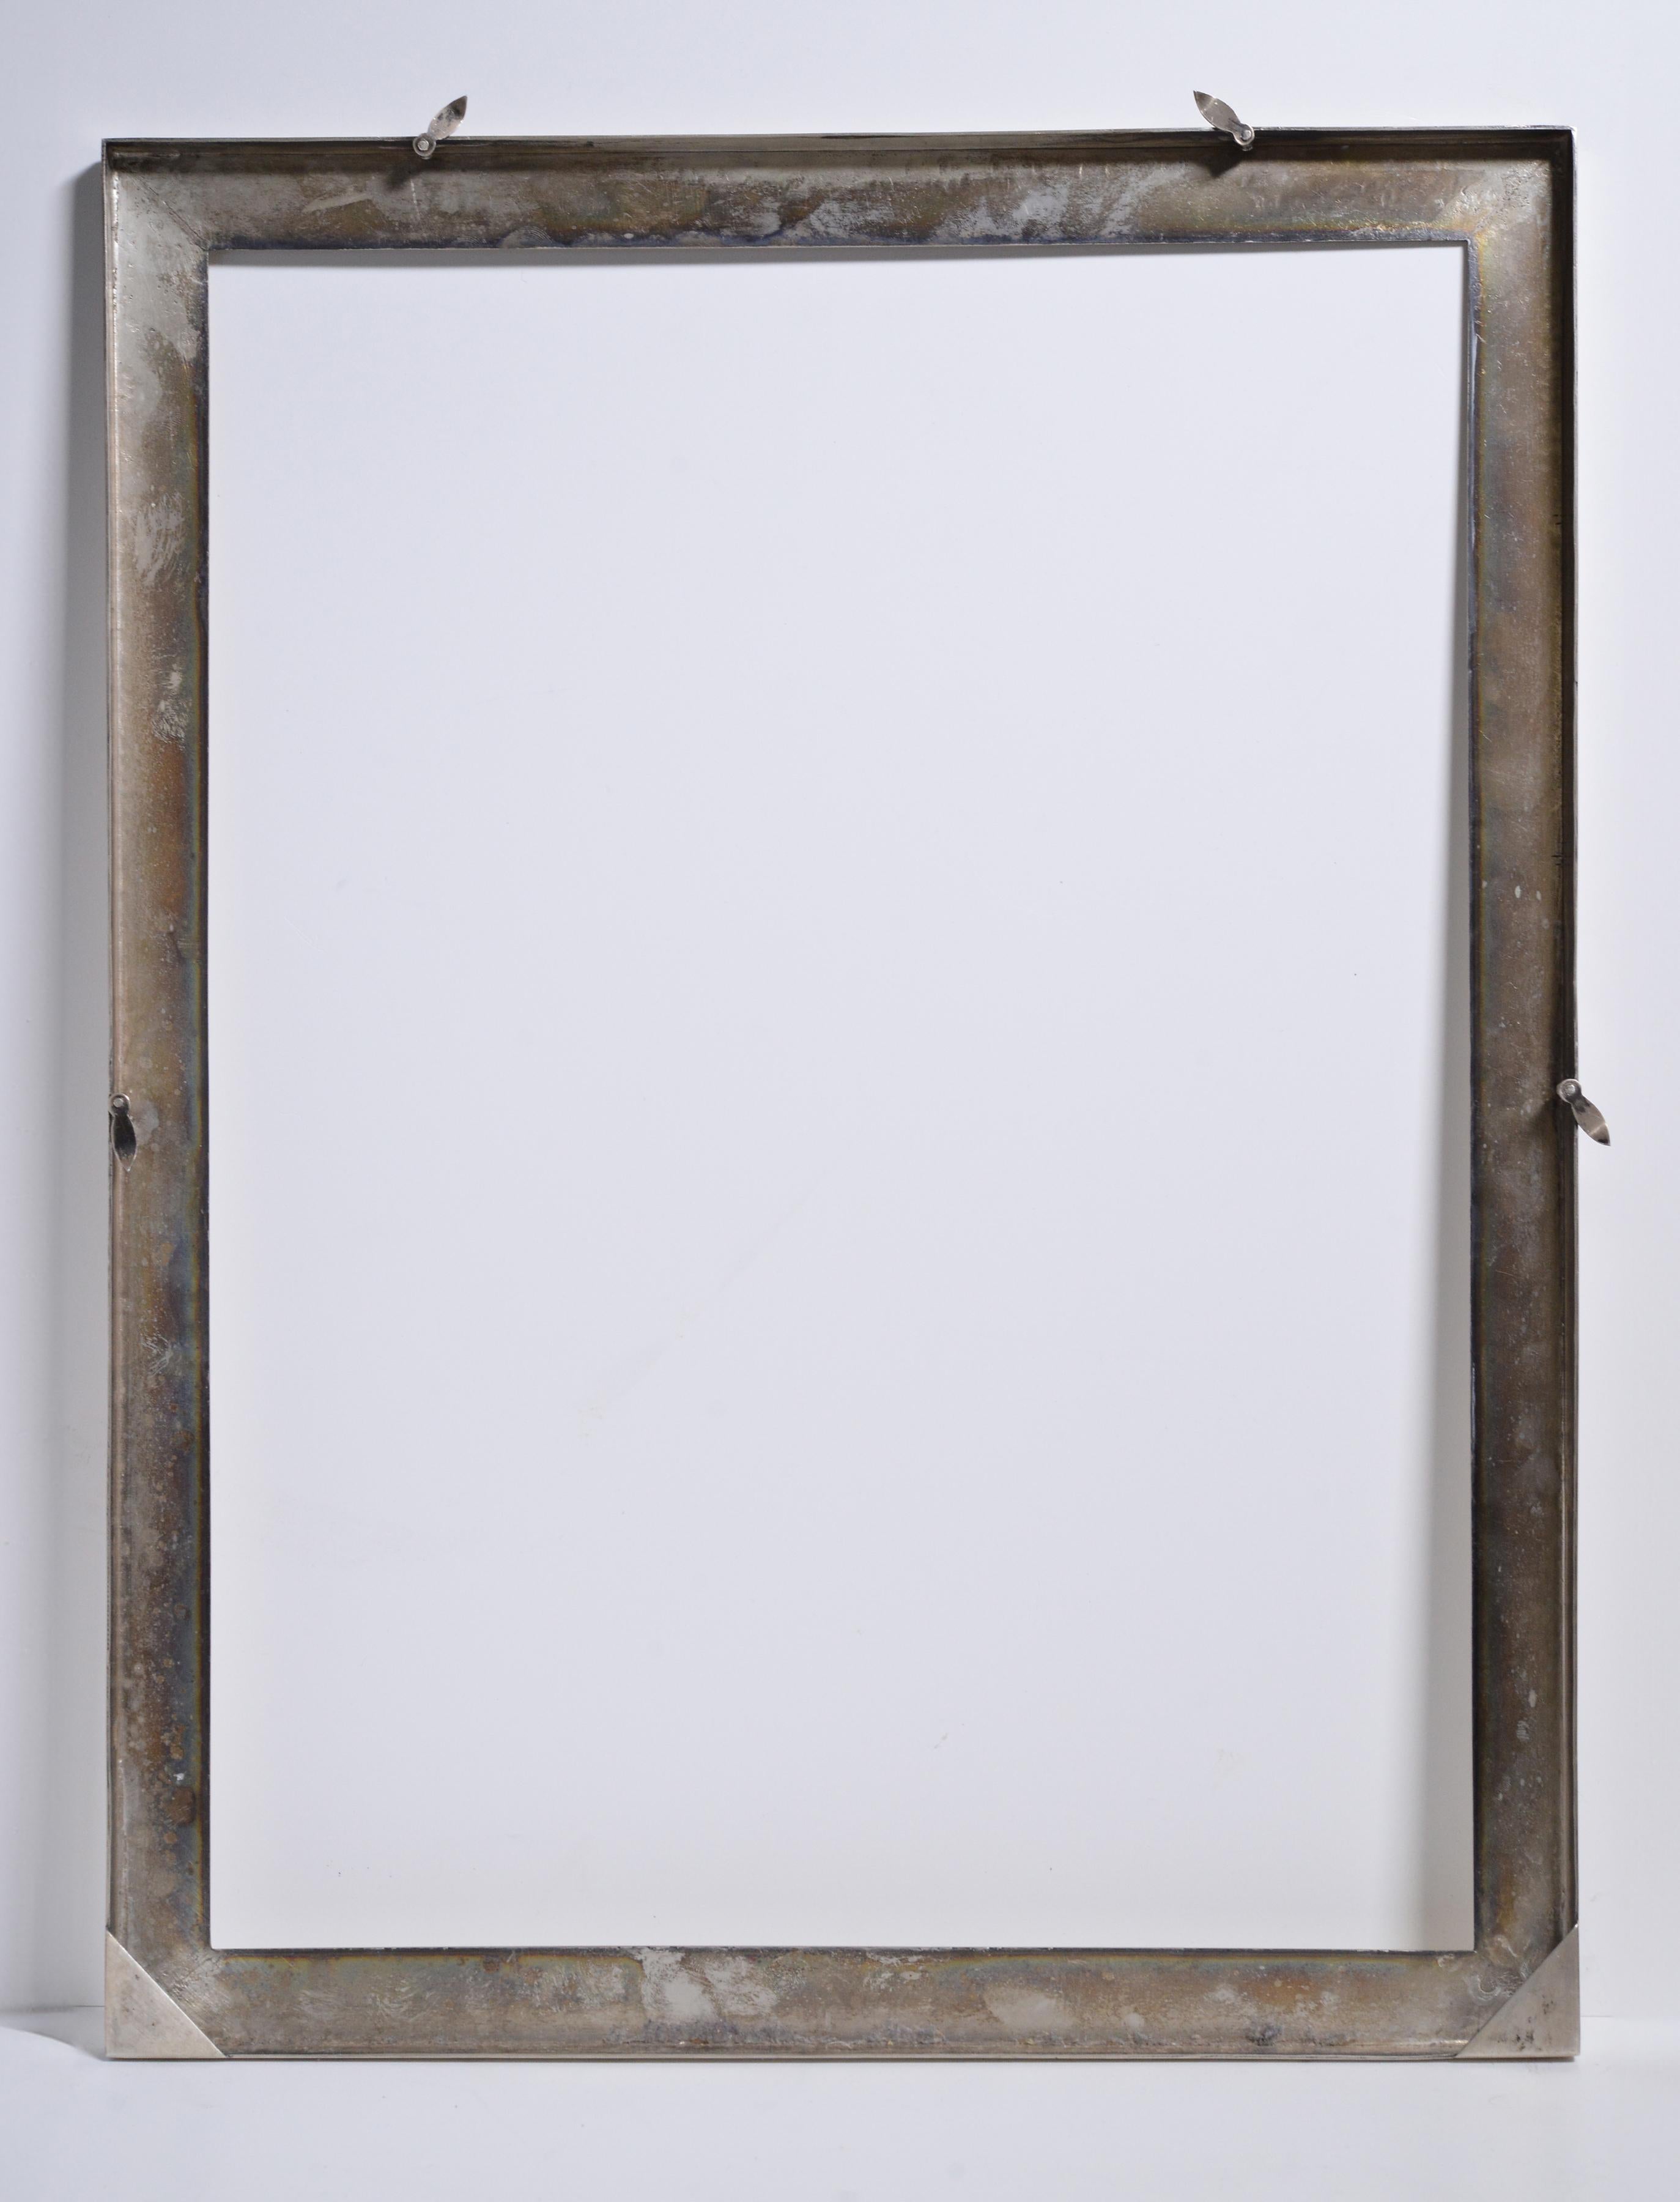 Antique Large Silver Frame by Russian Manufactory Grachev early 20th century In Good Condition For Sale In Sweden, SE